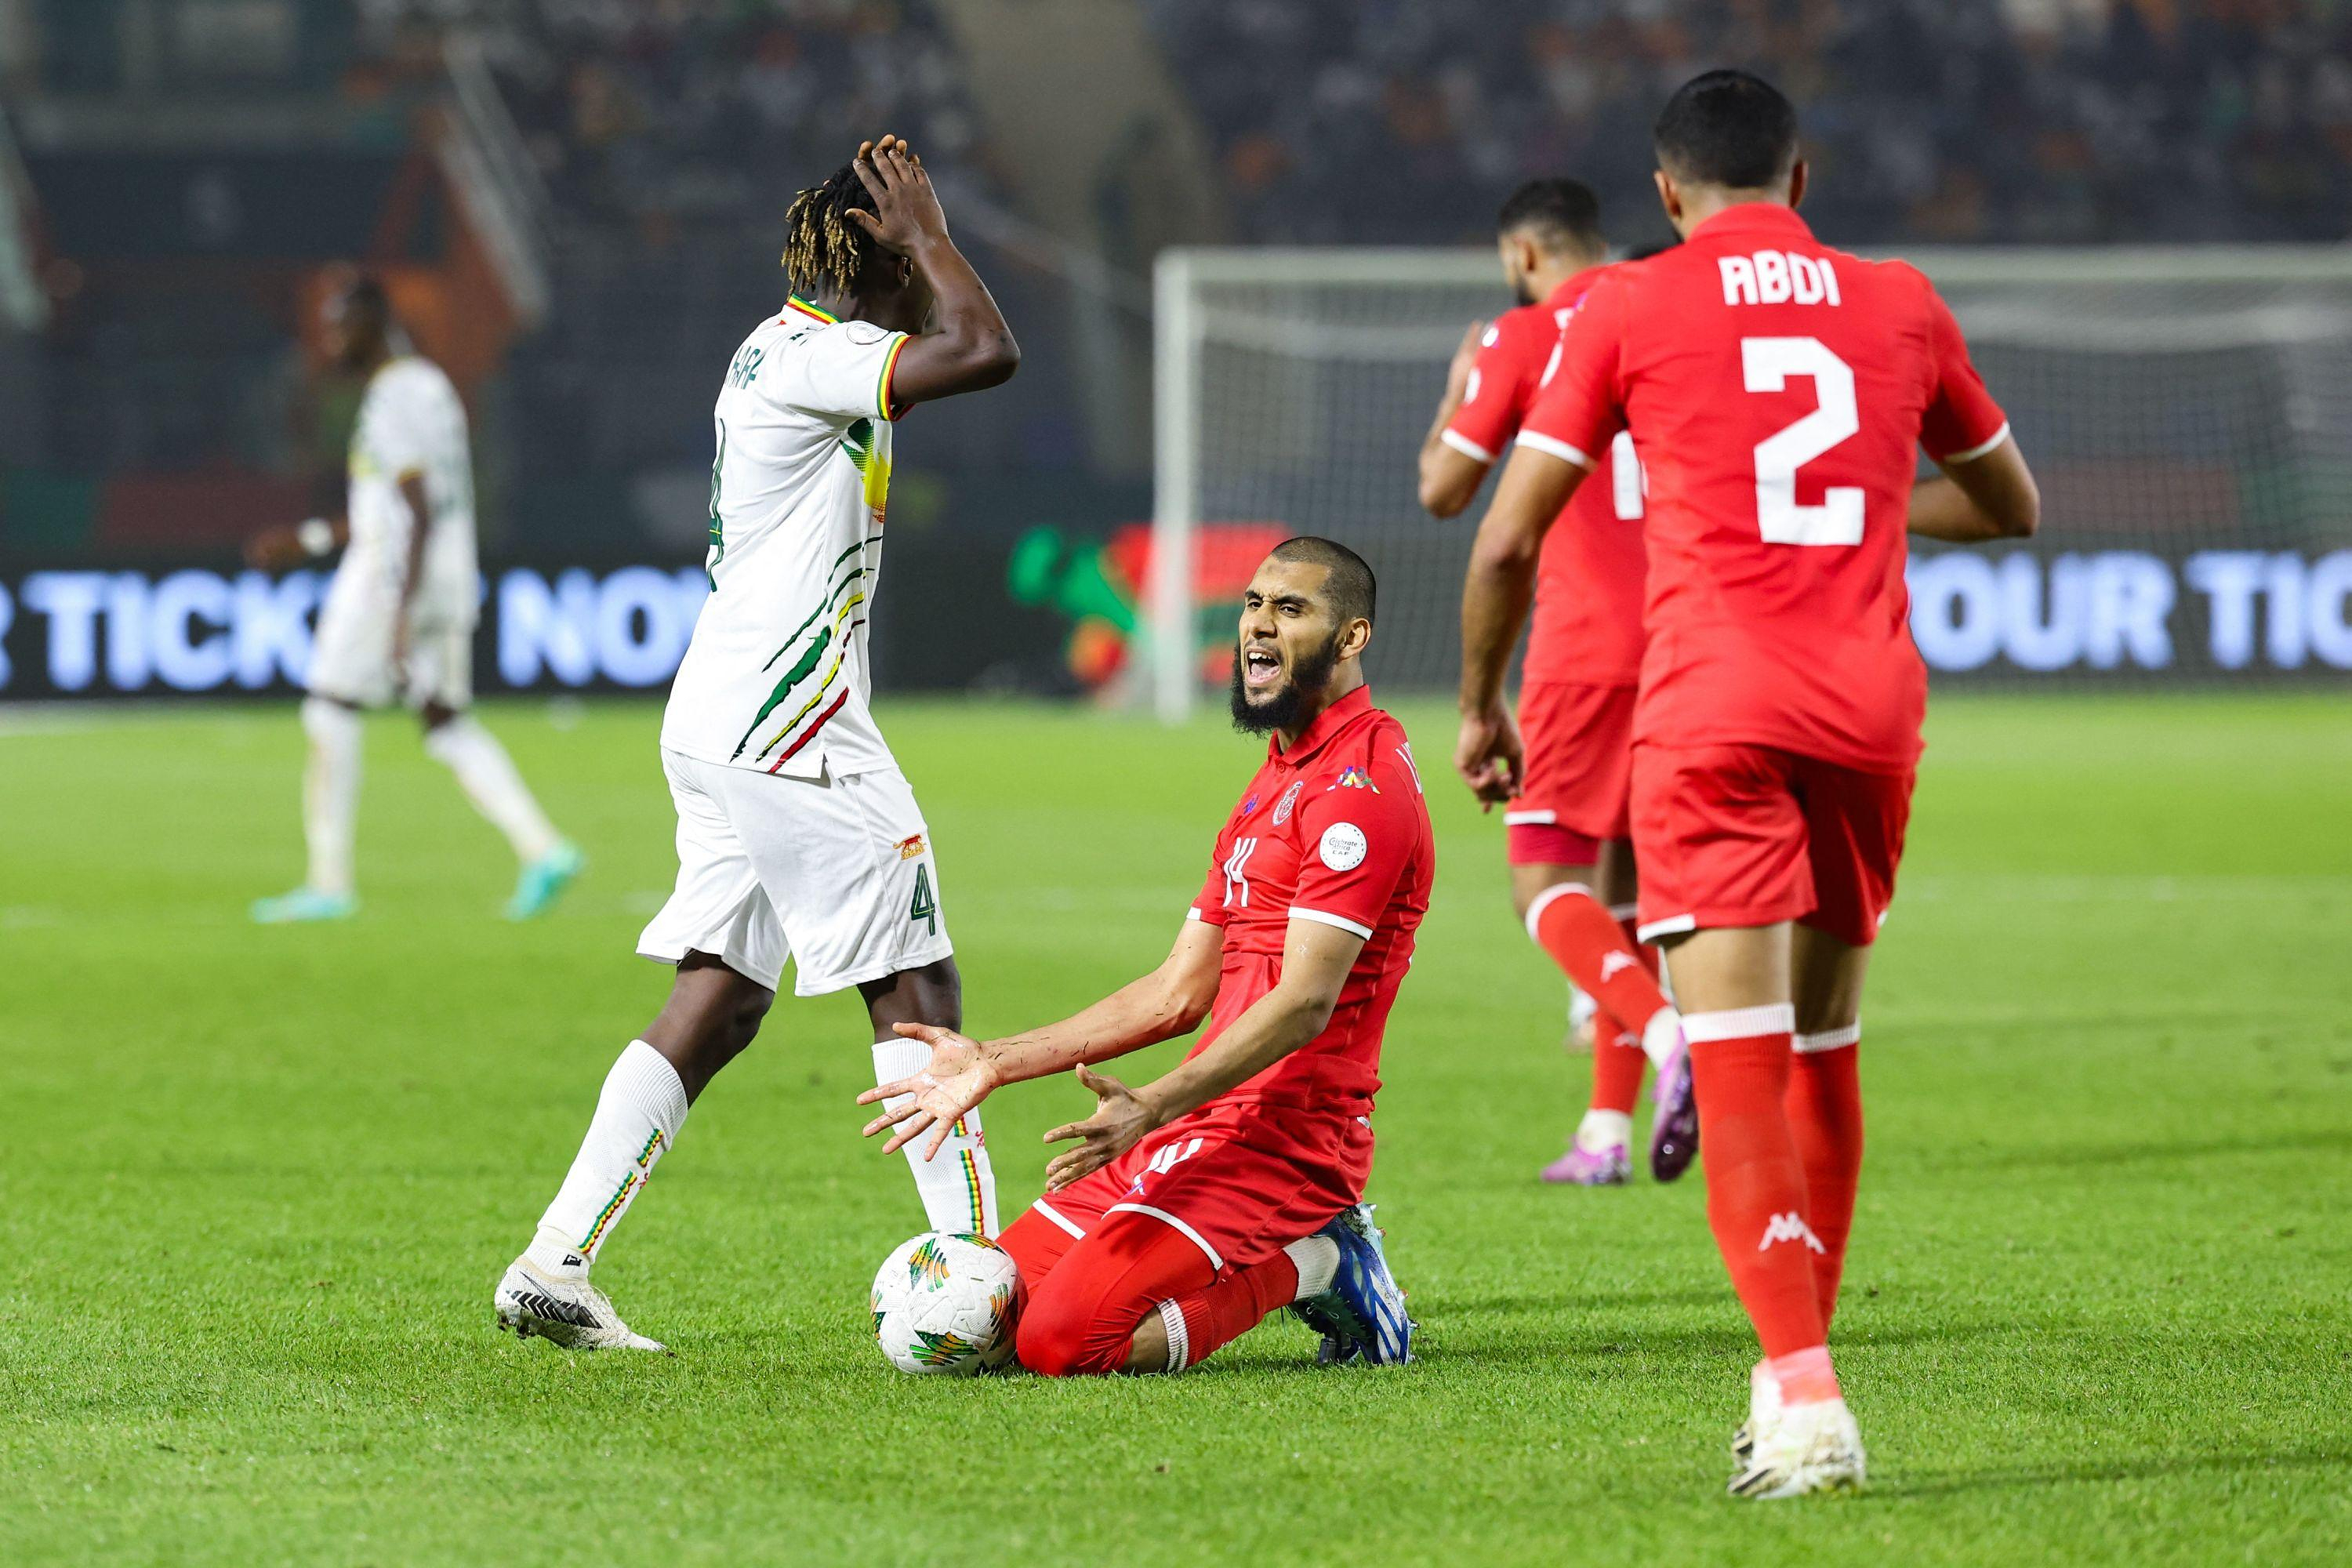 CAN: Mali concedes a draw against Tunisia but temporarily retains first place